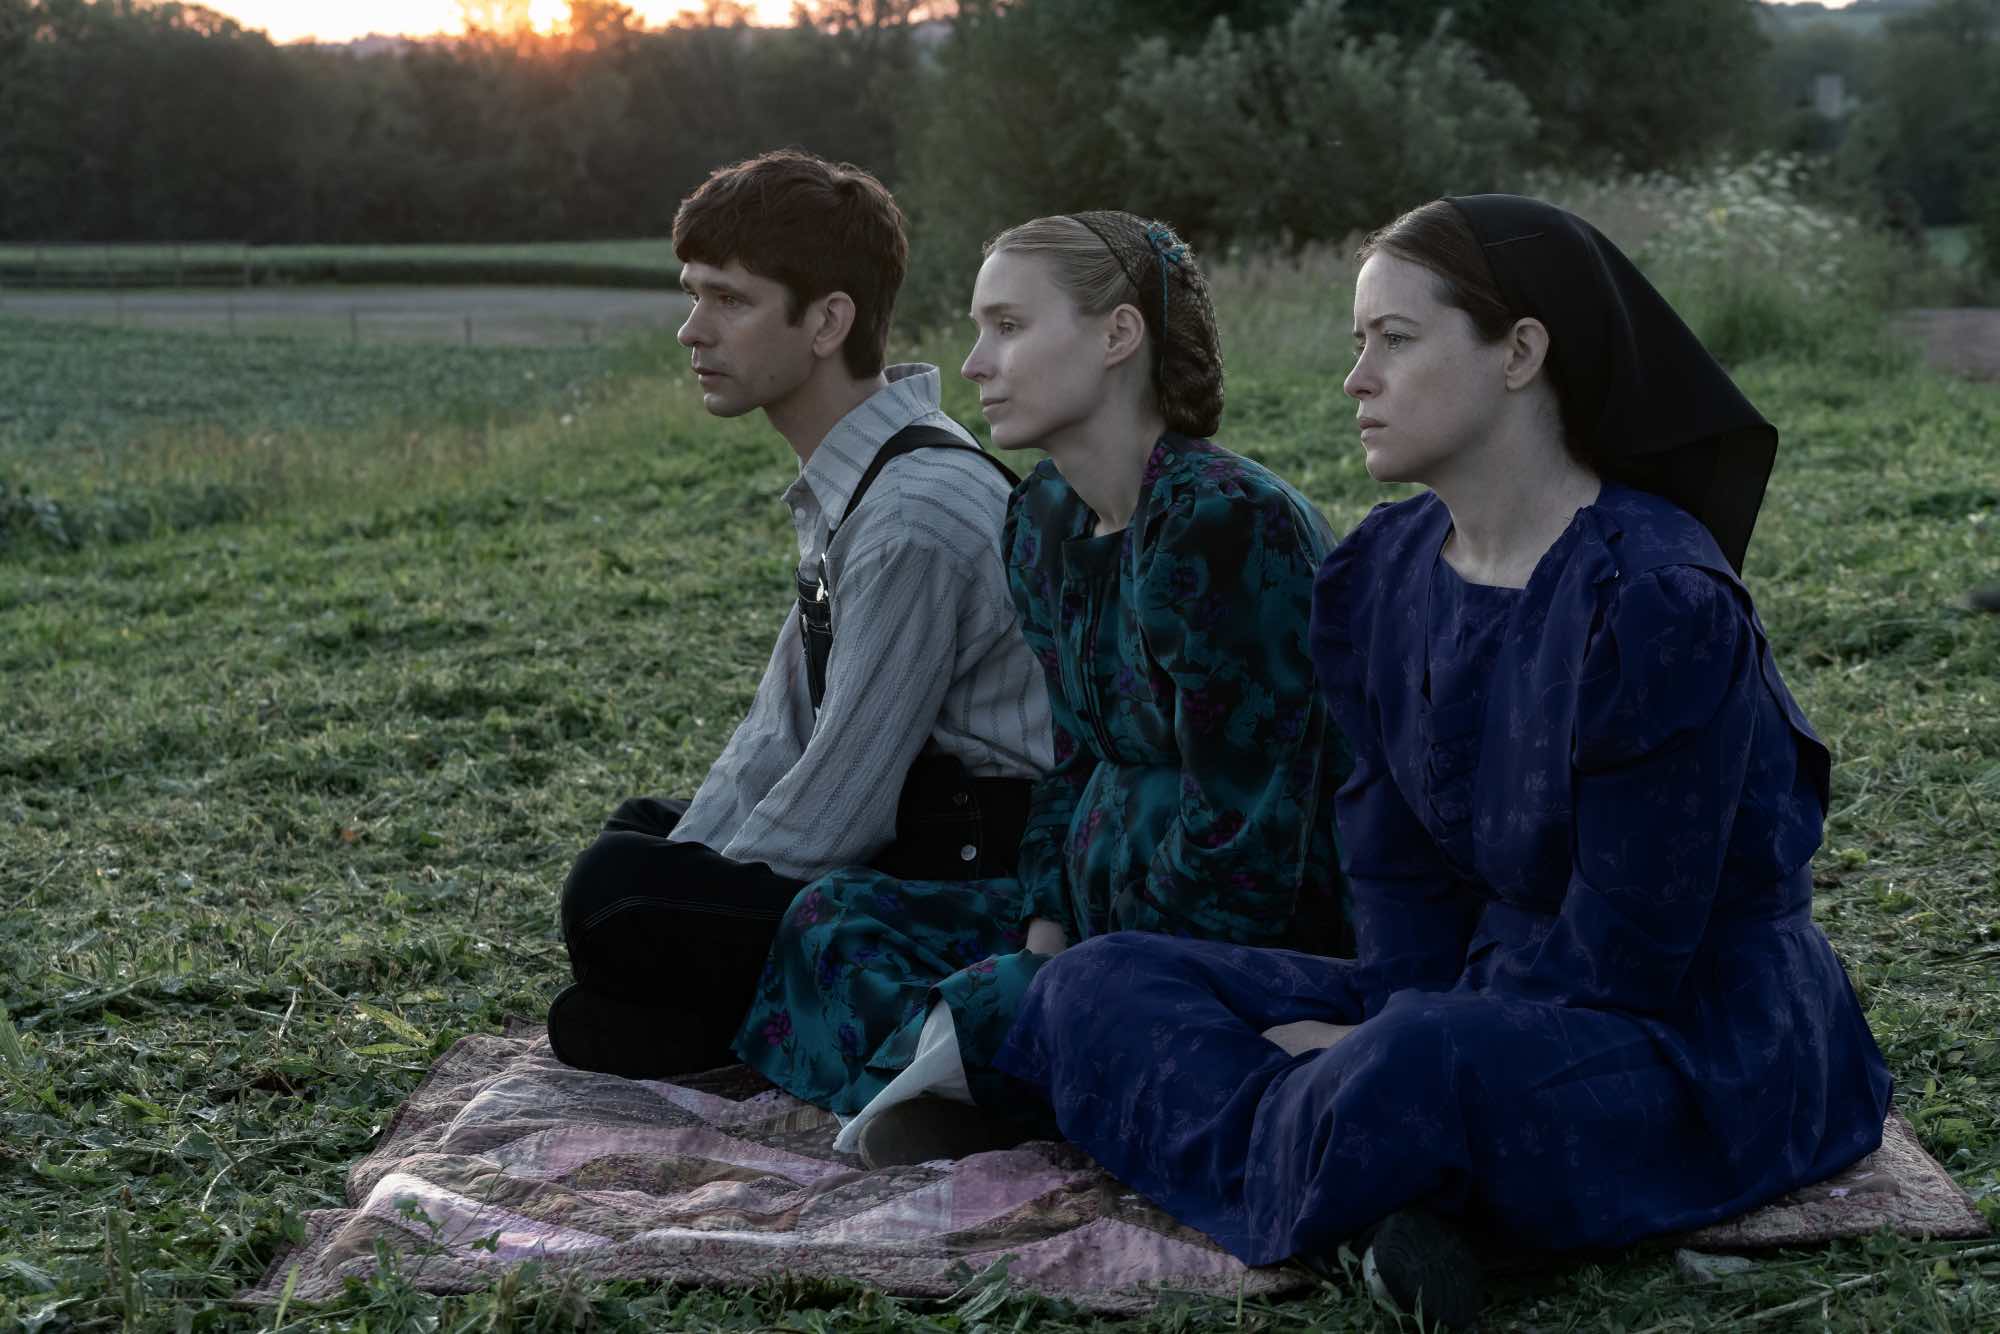 Oscars 2023 Best Picture nominee 'Women Talking' Ben Whishaw as August, Rooney Mara as Ona, and Claire Foy as Salome sitting on a blanket on a field of grass looking out into a field